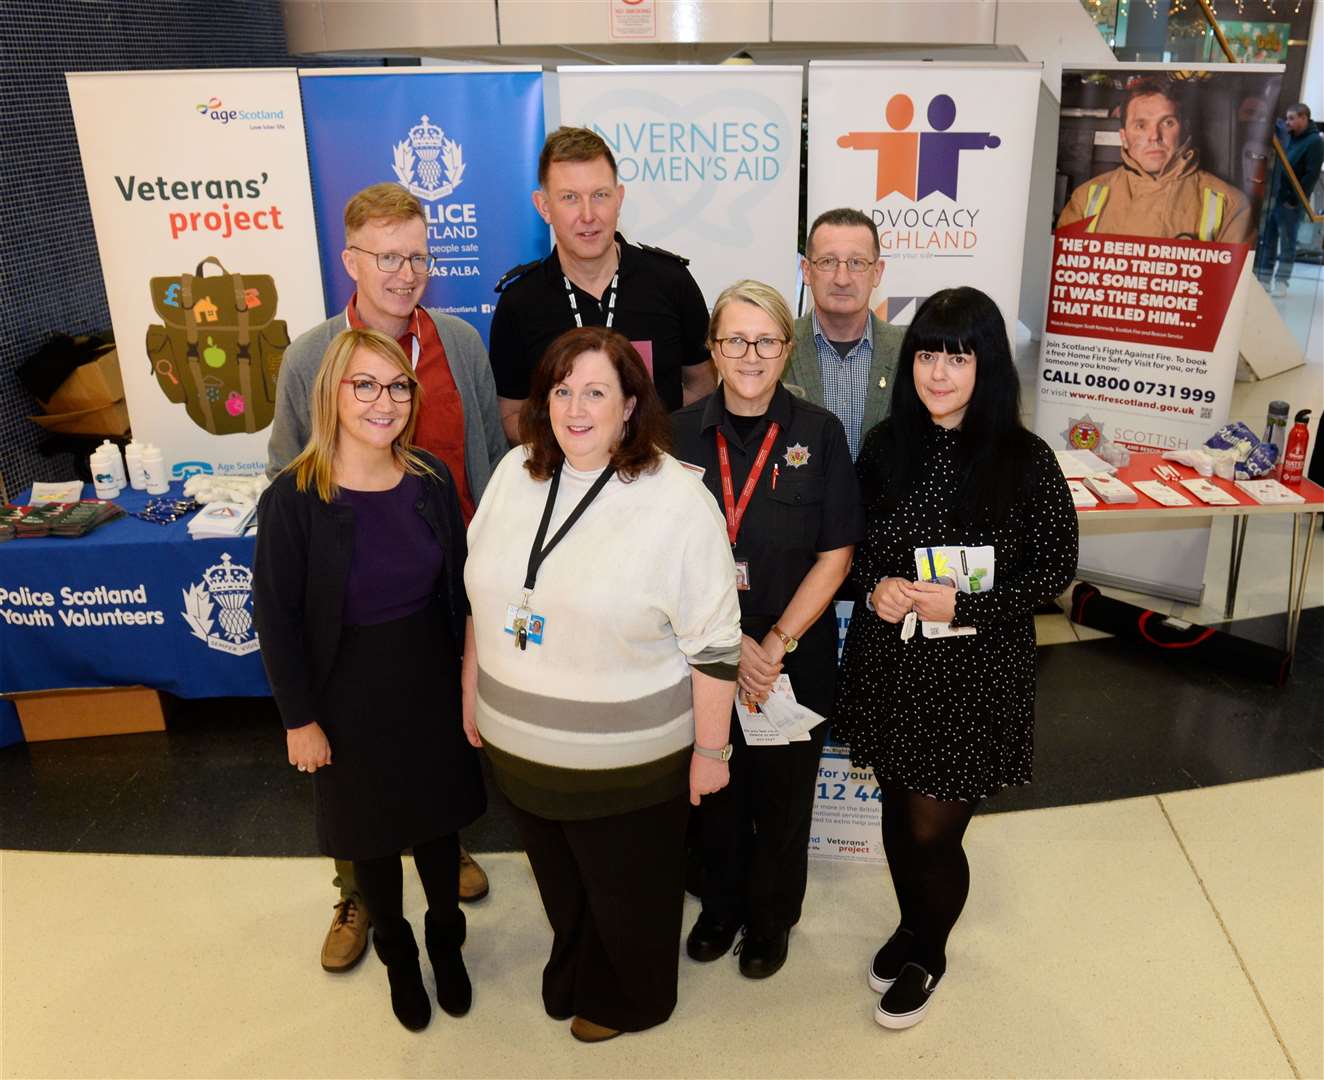 Taking the road safety message to the heart of the community. A multi-agency stall at Eastgate Shopping Centre featured (from left) community banker Laura Fraser, Les Hood of NHS Adult Support and Protection, Keri Jones of Police Scotland, Elaine Fetherston of Inverness Women's Aid, Elaine Taylor of the Scottish Fire and Rescue Service, Steve Henderson of the Veterans' Project and Dawn Kotschujew, of Advocacy Highland.